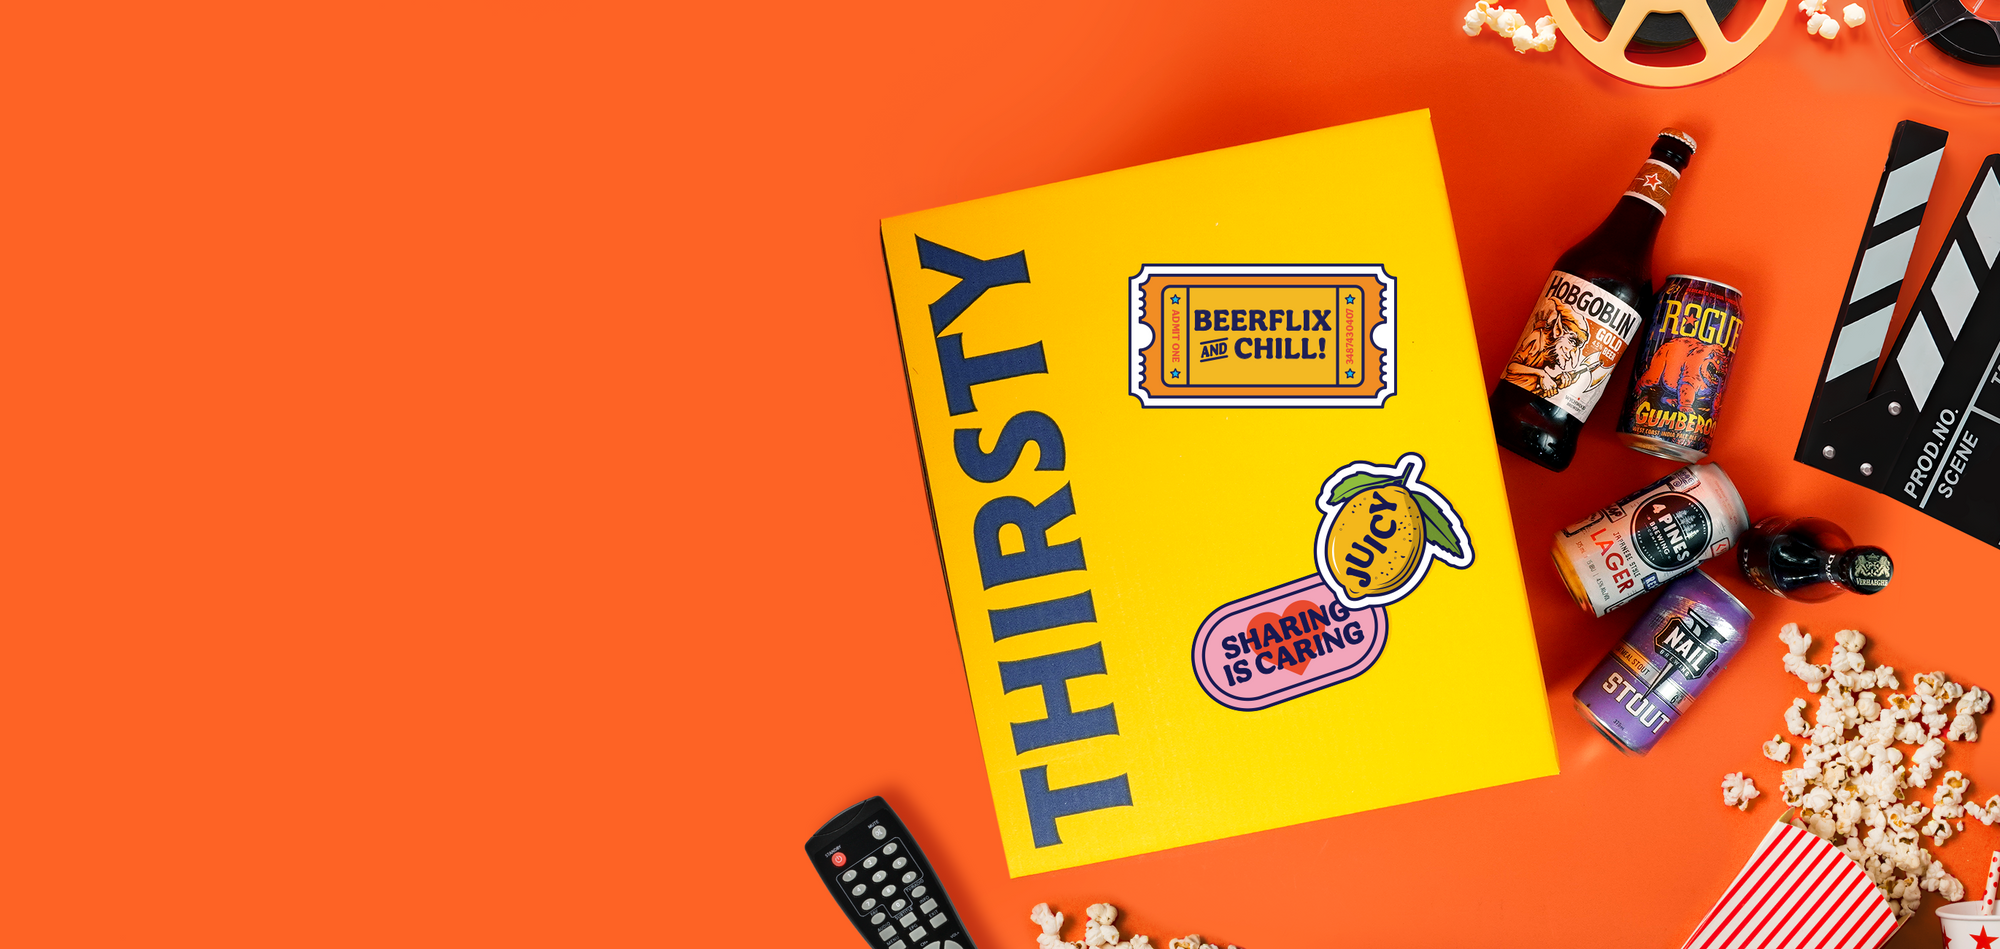 Thirsty 'Beerflix & Chill' Movie Party Box